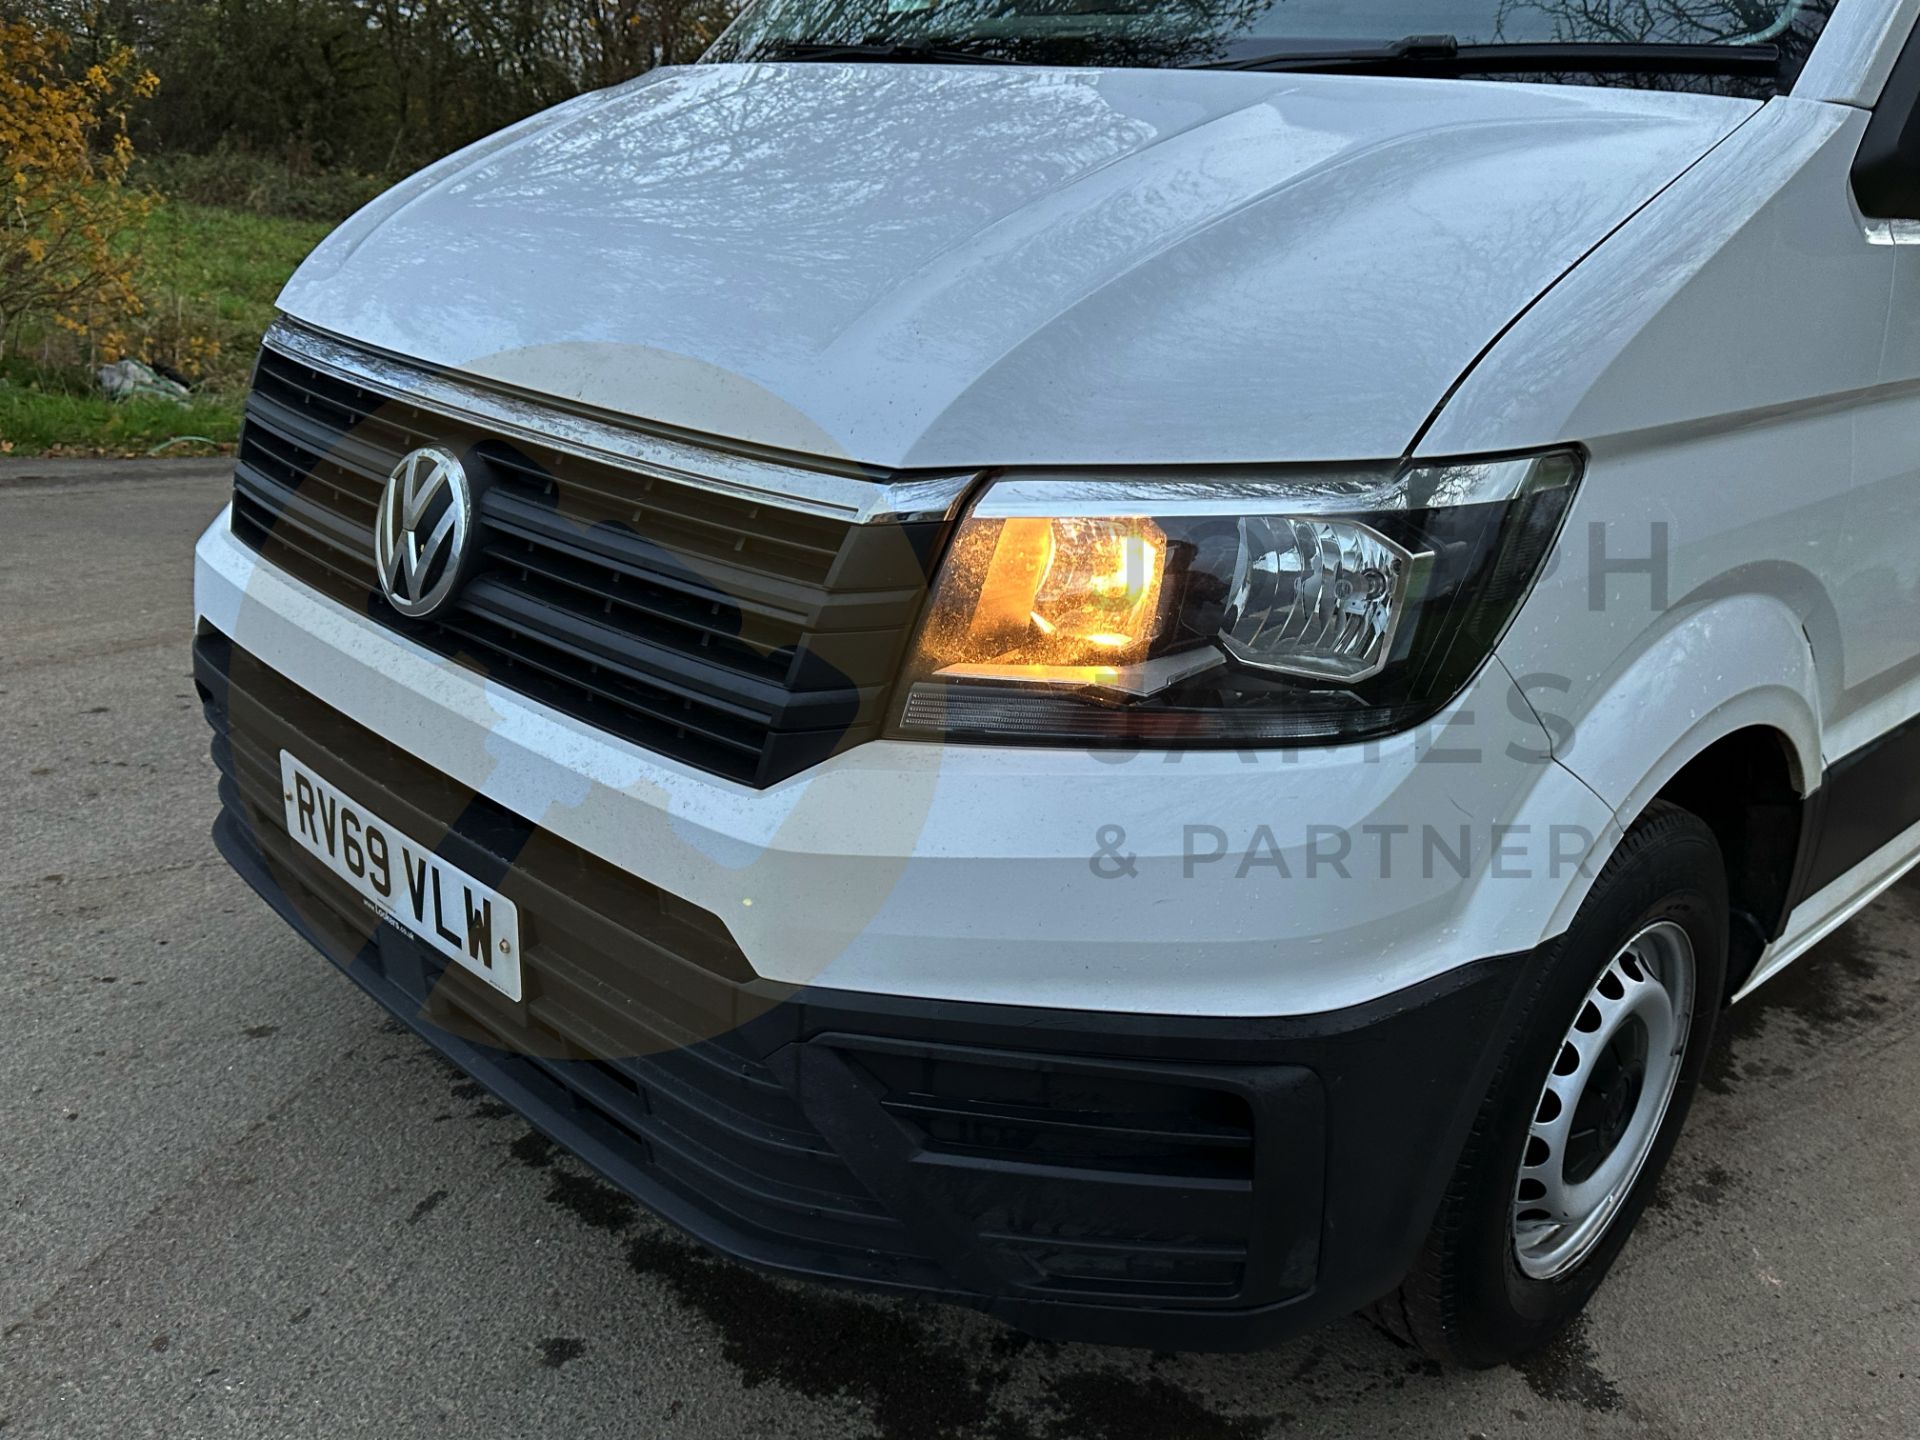 (ON SALE) VOLKSWAGEN CRAFTER CR35 *LUTON / BOX VAN* (2020 - EURO 6) 2.0 TDI - 6 SPEED *TAIL-LIFT* - Image 16 of 38